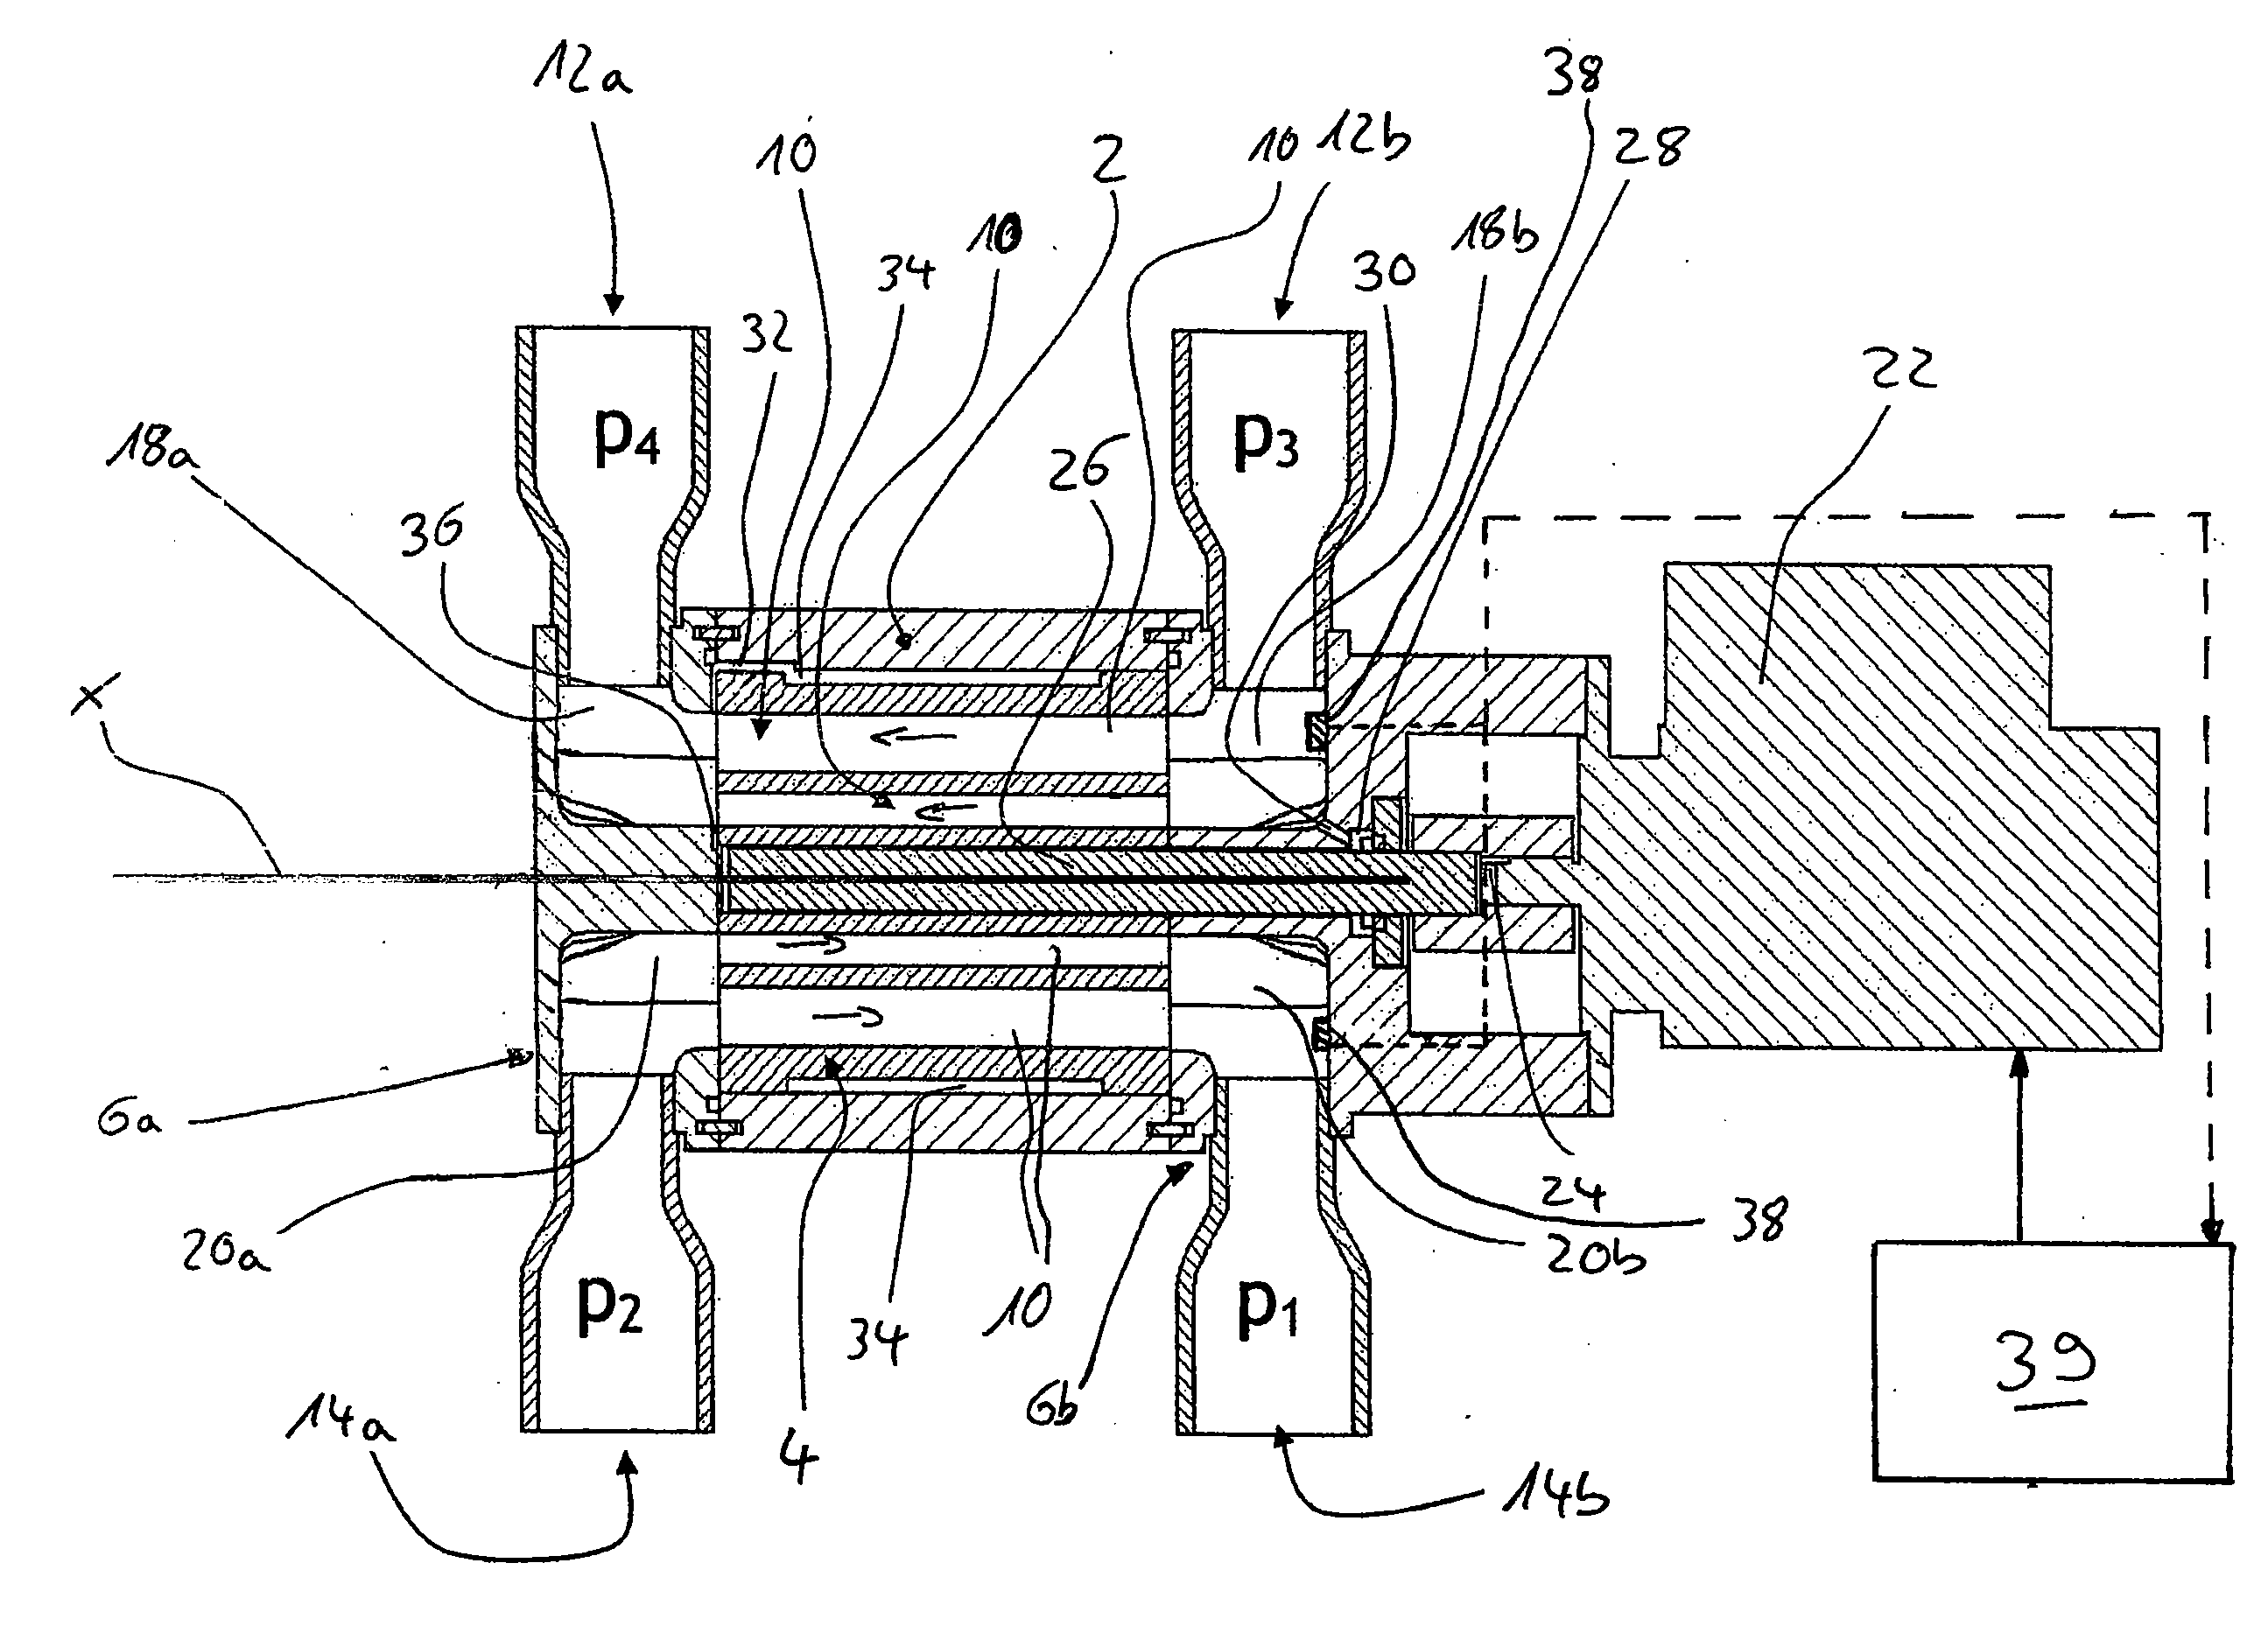 Pressure exchanger for transmitting pressure energy from a first liquid stream to a second liquid stream